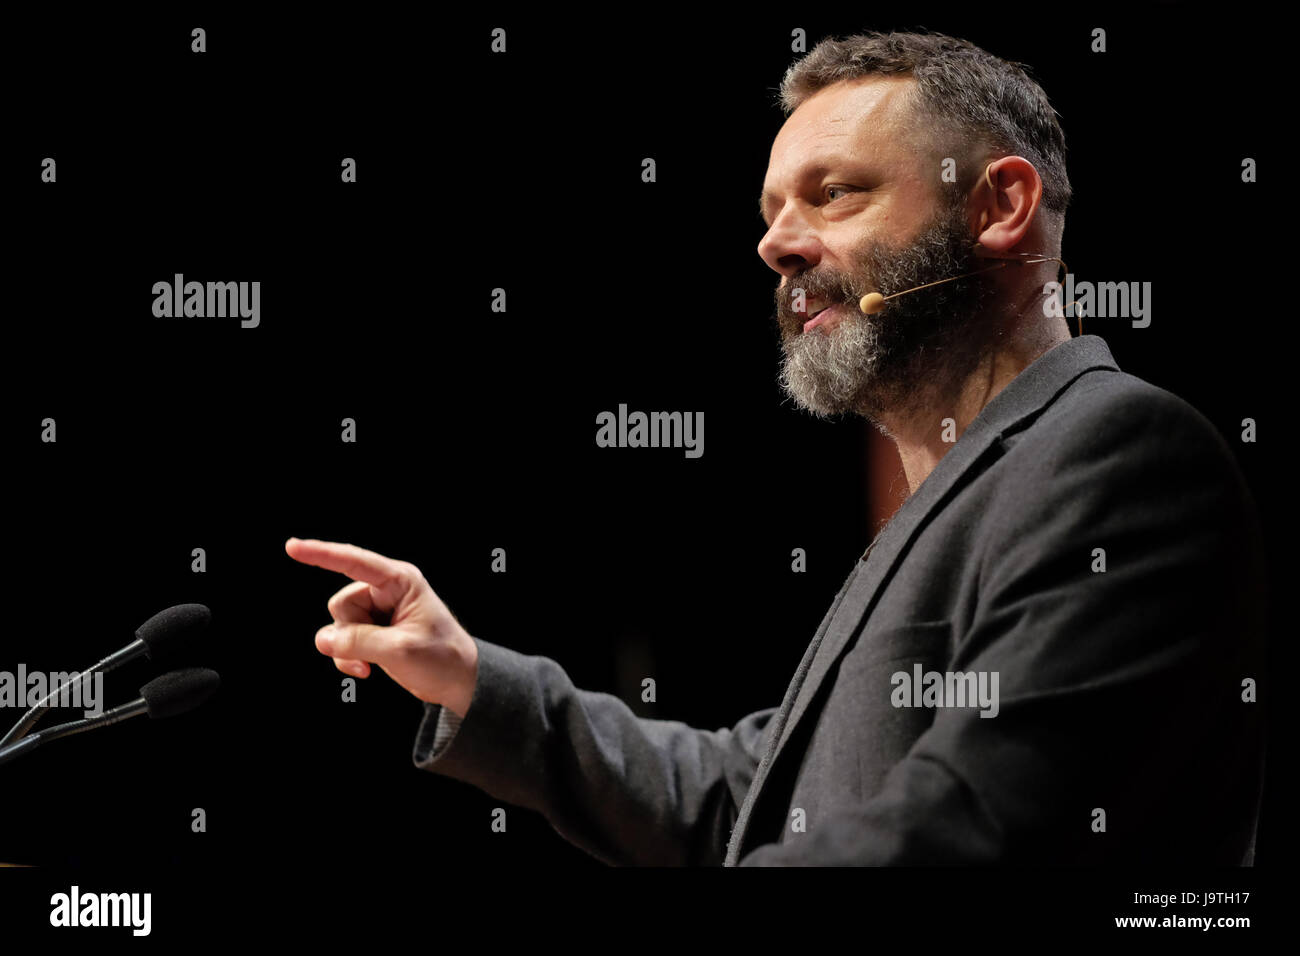 Hay Festival 2017 - Hay on Wye, Wales, UK - Saturday 3rd June 2017 - Actor Michael Sheen gives the Aneurin Bevan Lecture on stage at the Hay Festival  - the Hay Festival celebrates its 30th anniversary in 2017 - the literary festival runs until Sunday June 4th.  Steven May / Alamy Live News Stock Photo